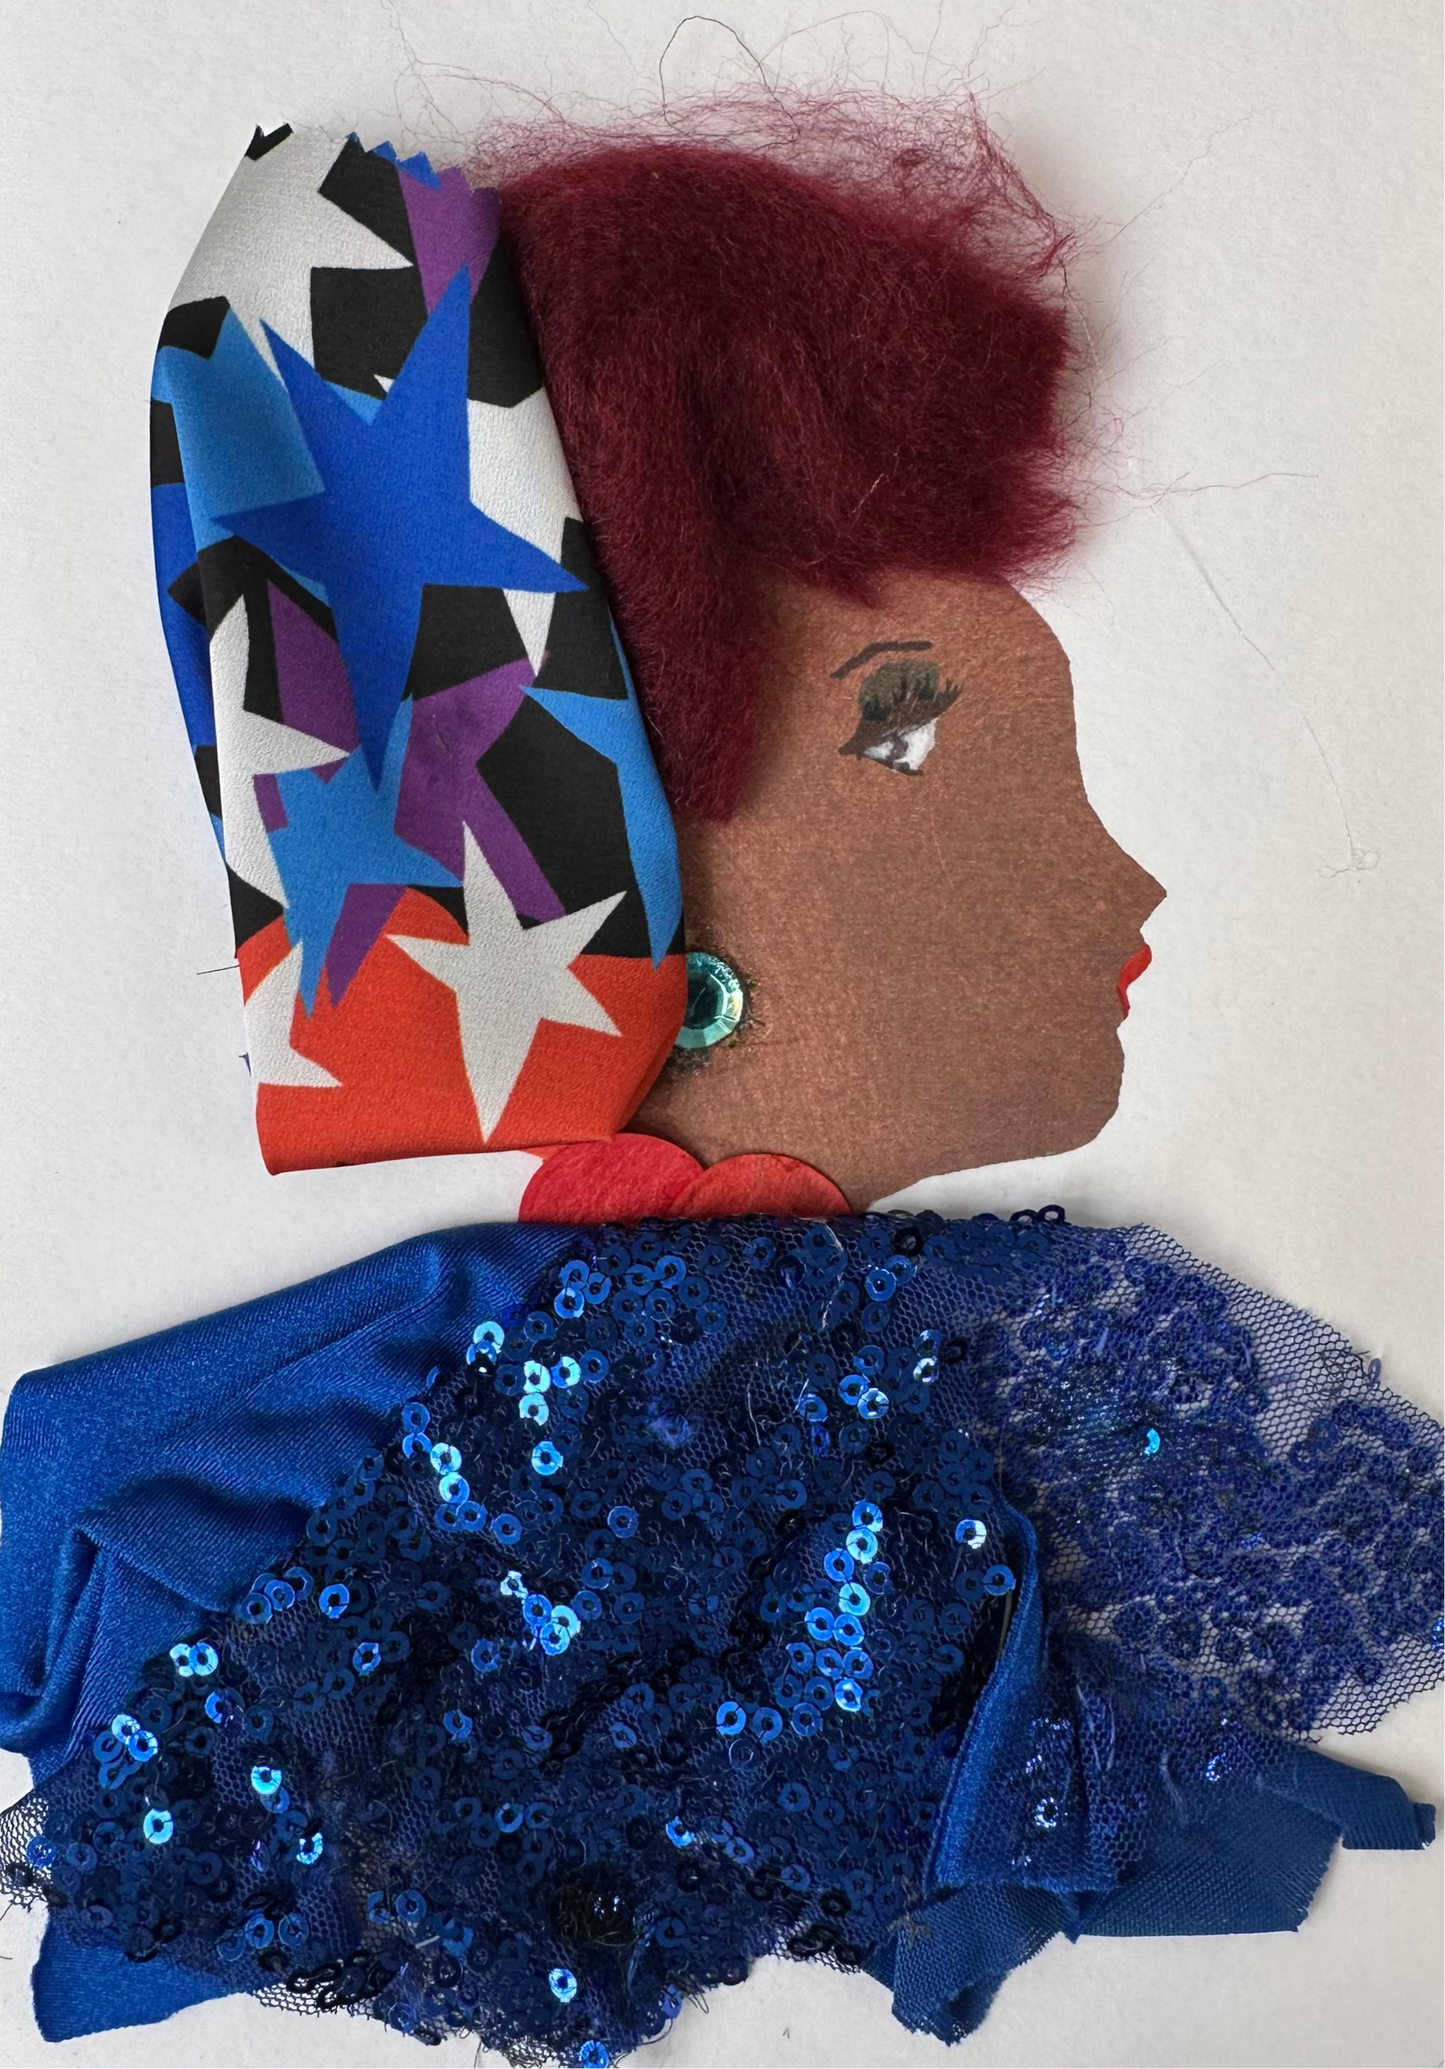 This card depicts a woman named Tottenham Tiffany. She is dressed in a navy blue sequin blouse. Her red hair is tied in a red, white, and blue star-patterned cloth.&nbsp;